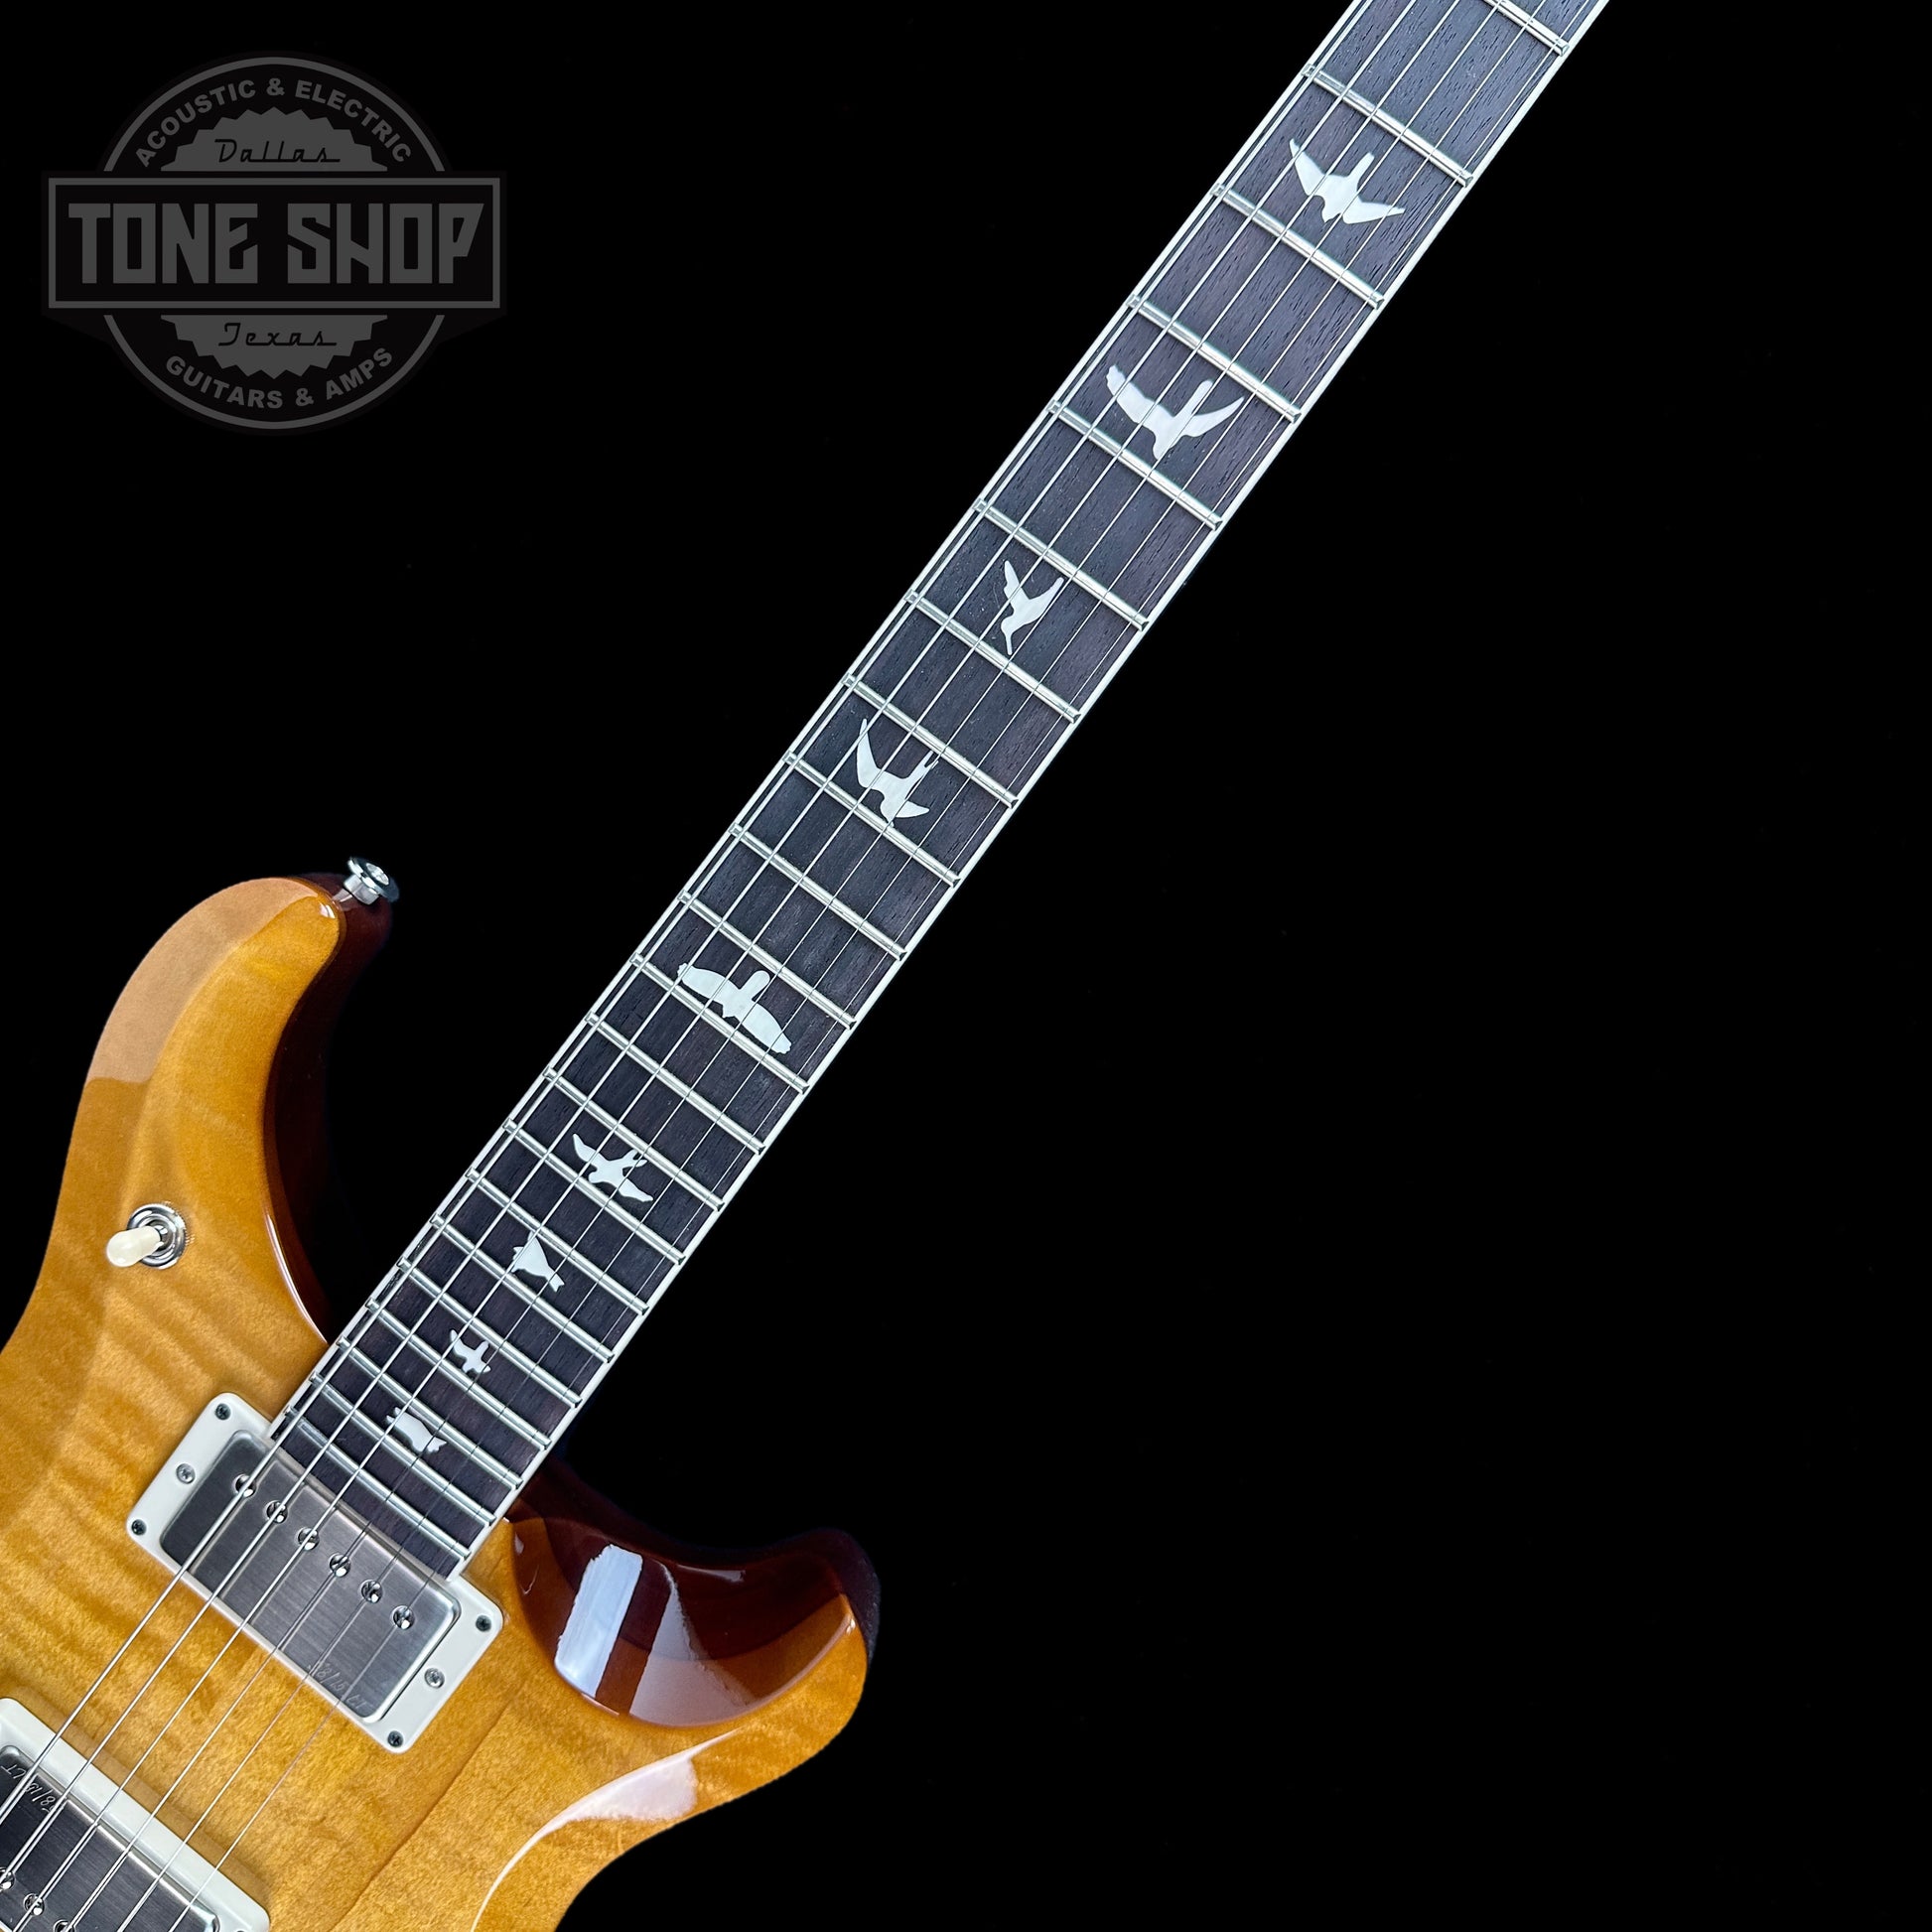 Fretboard of PRS S2 McCarty 594 Flame Top Honey.